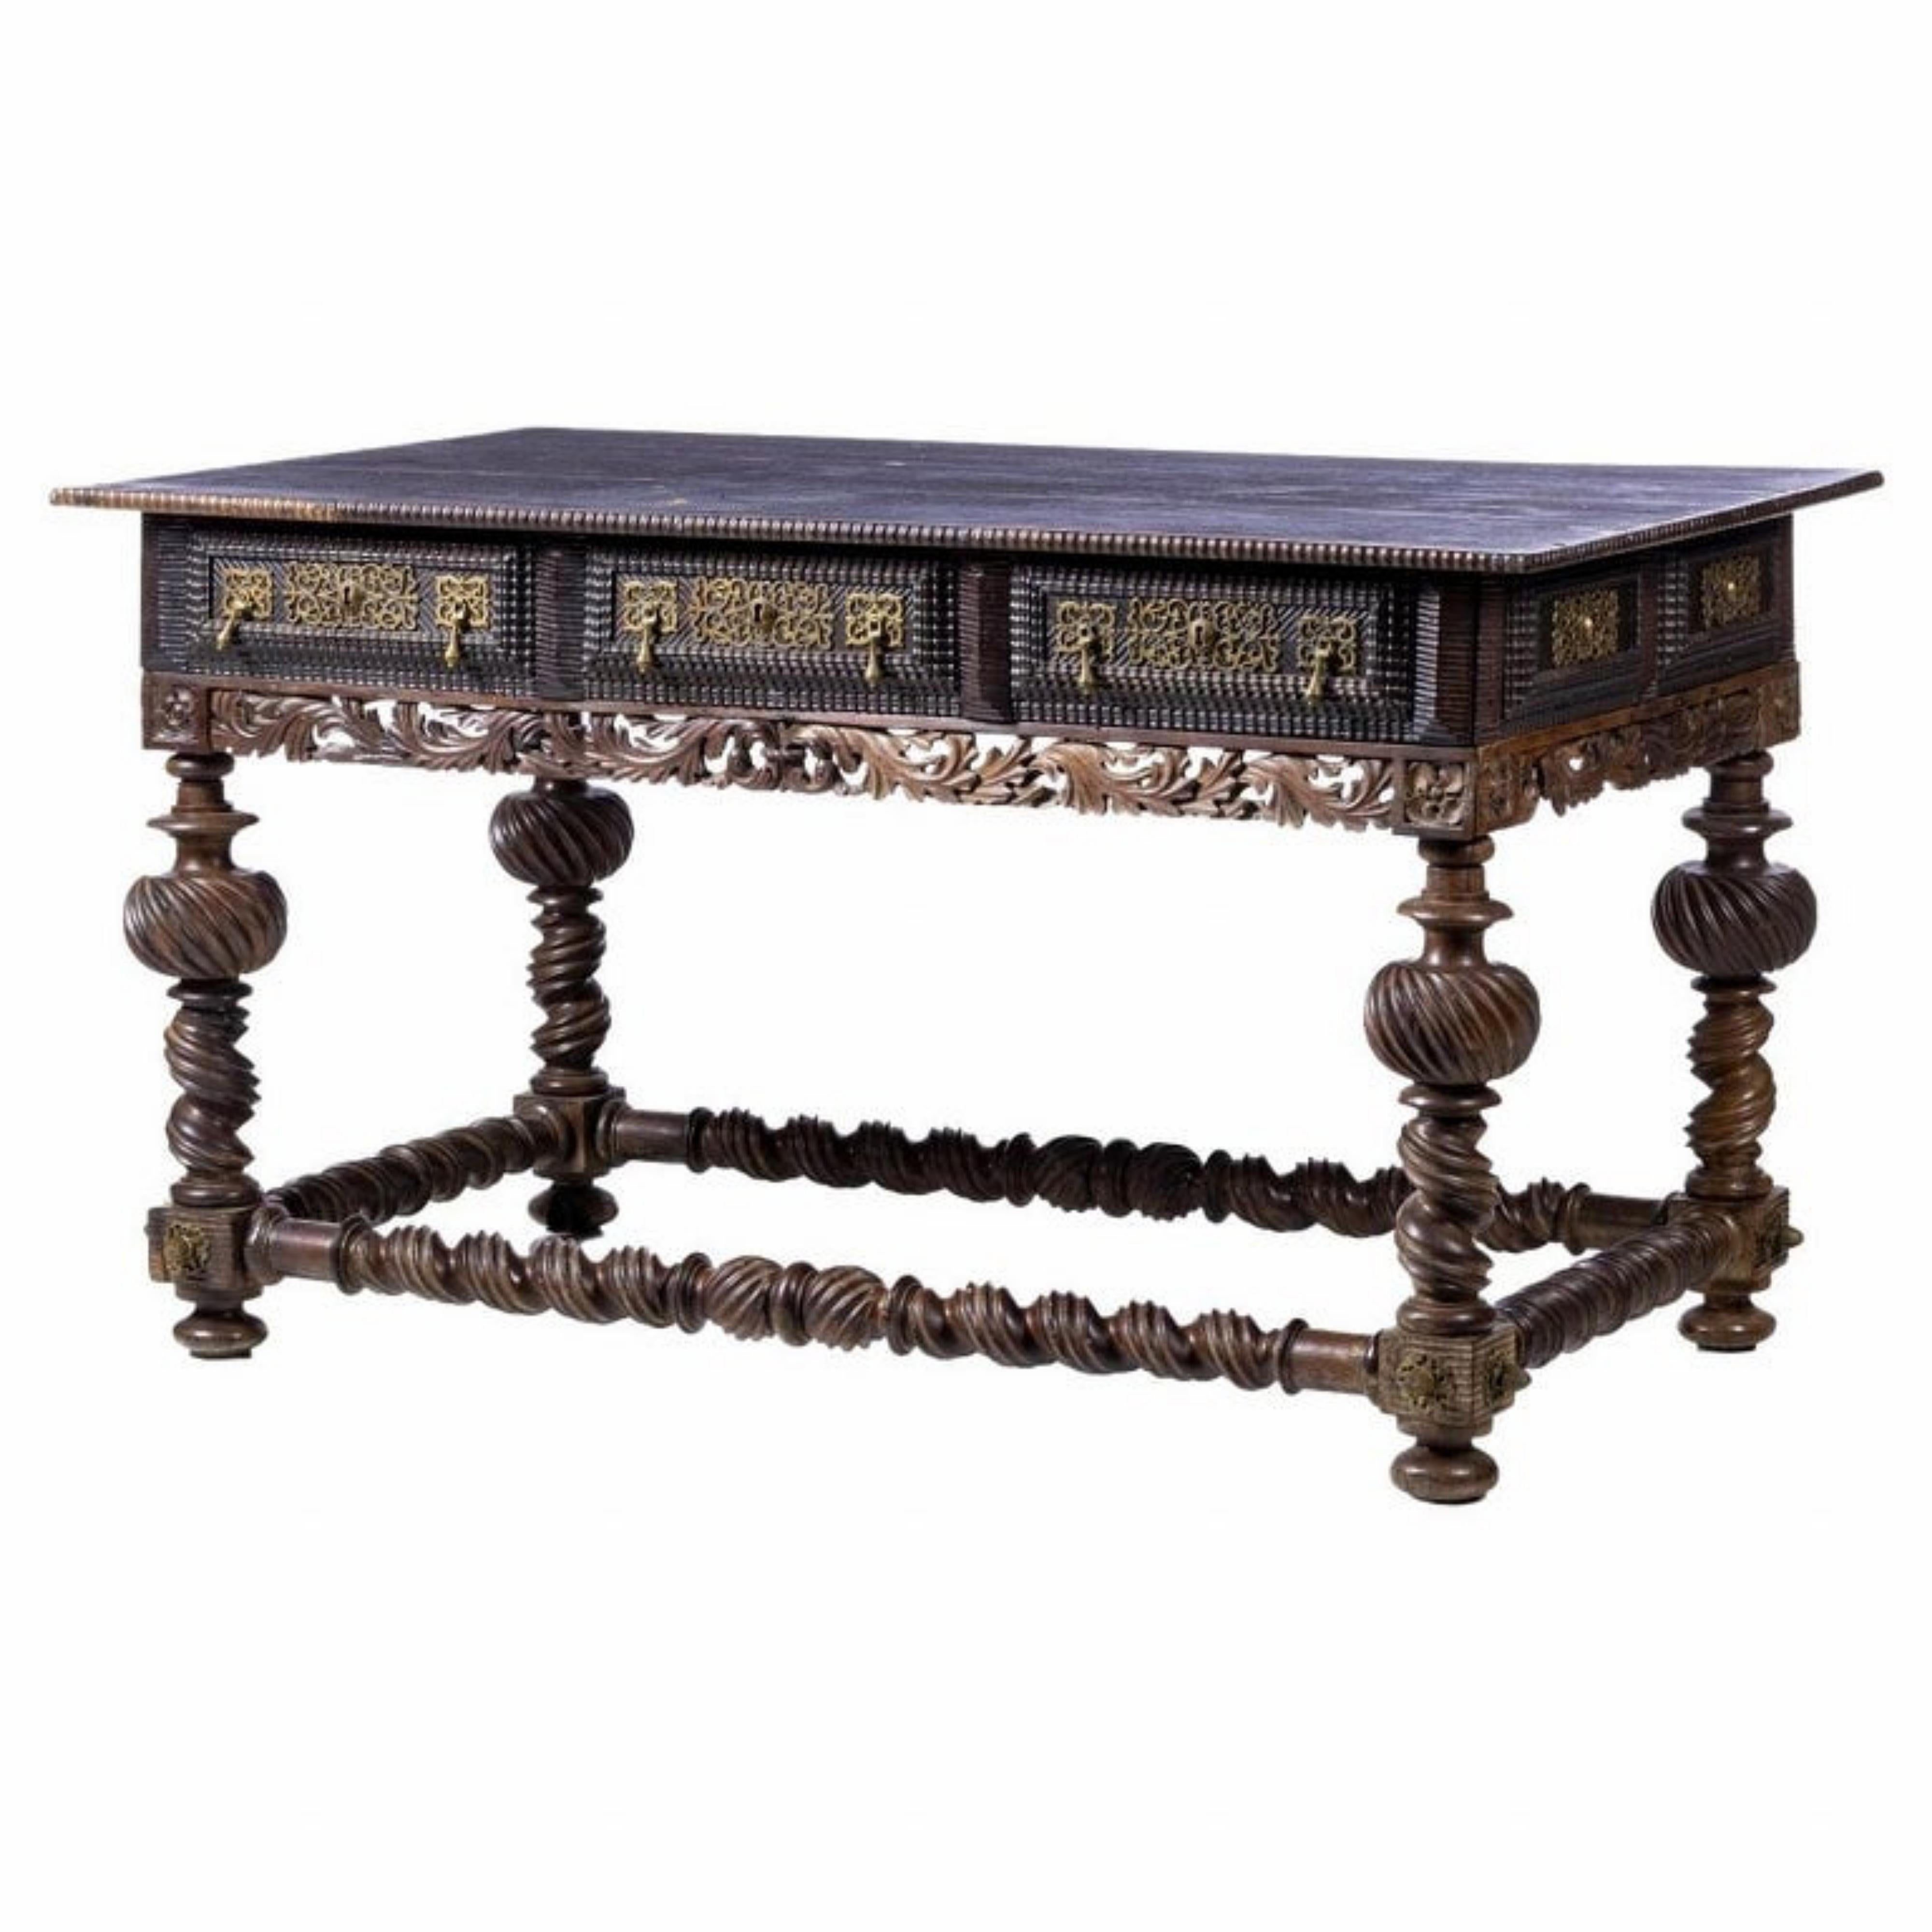 Important Portuguese table Bufete 18th century

In rosewood wood with twisted and trembling carvings. Rectangular-shaped table top, framed on the front and sides by a jagged frieze, waistband with three drawers, with padded decoration and jagged